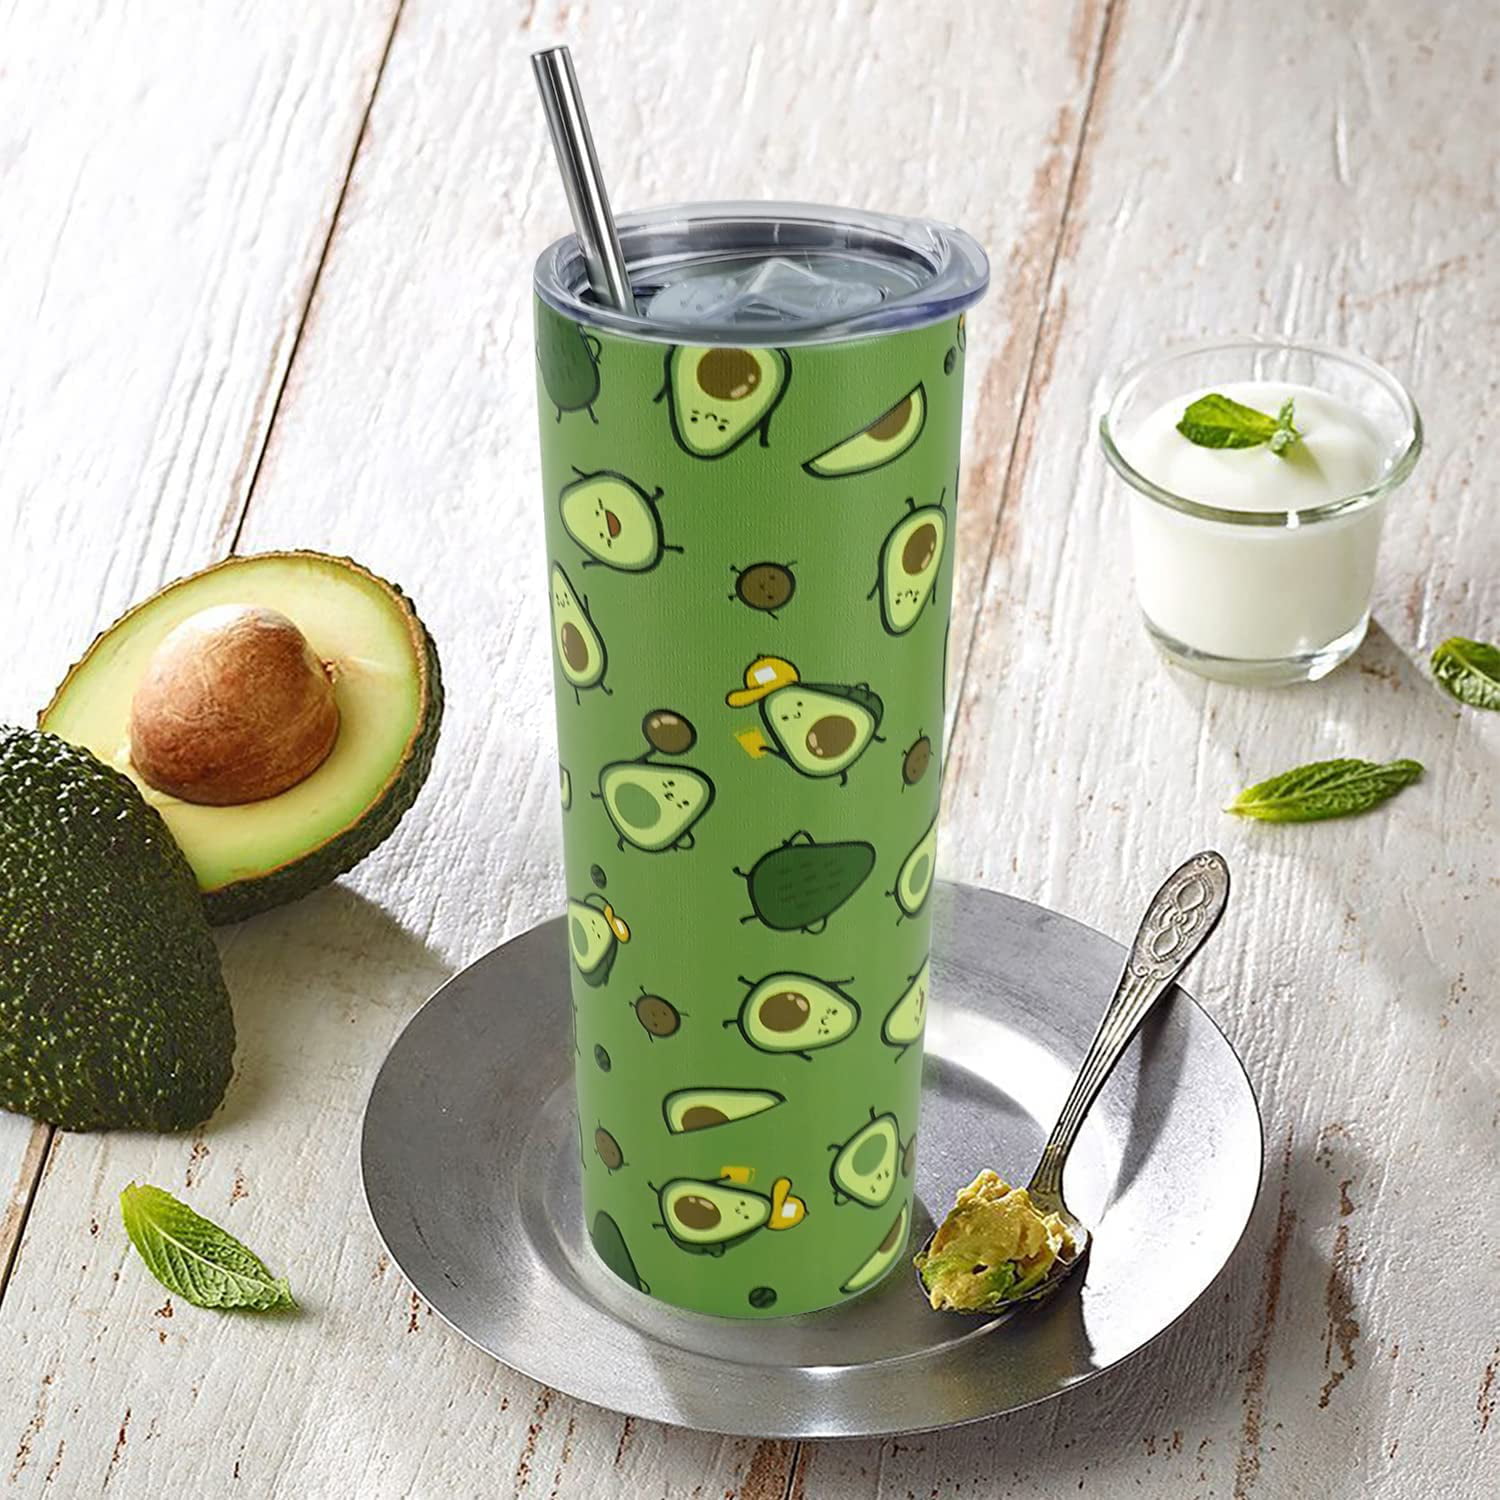  xigua Avocado Tumbler Car Travel Cup with Straw Lid